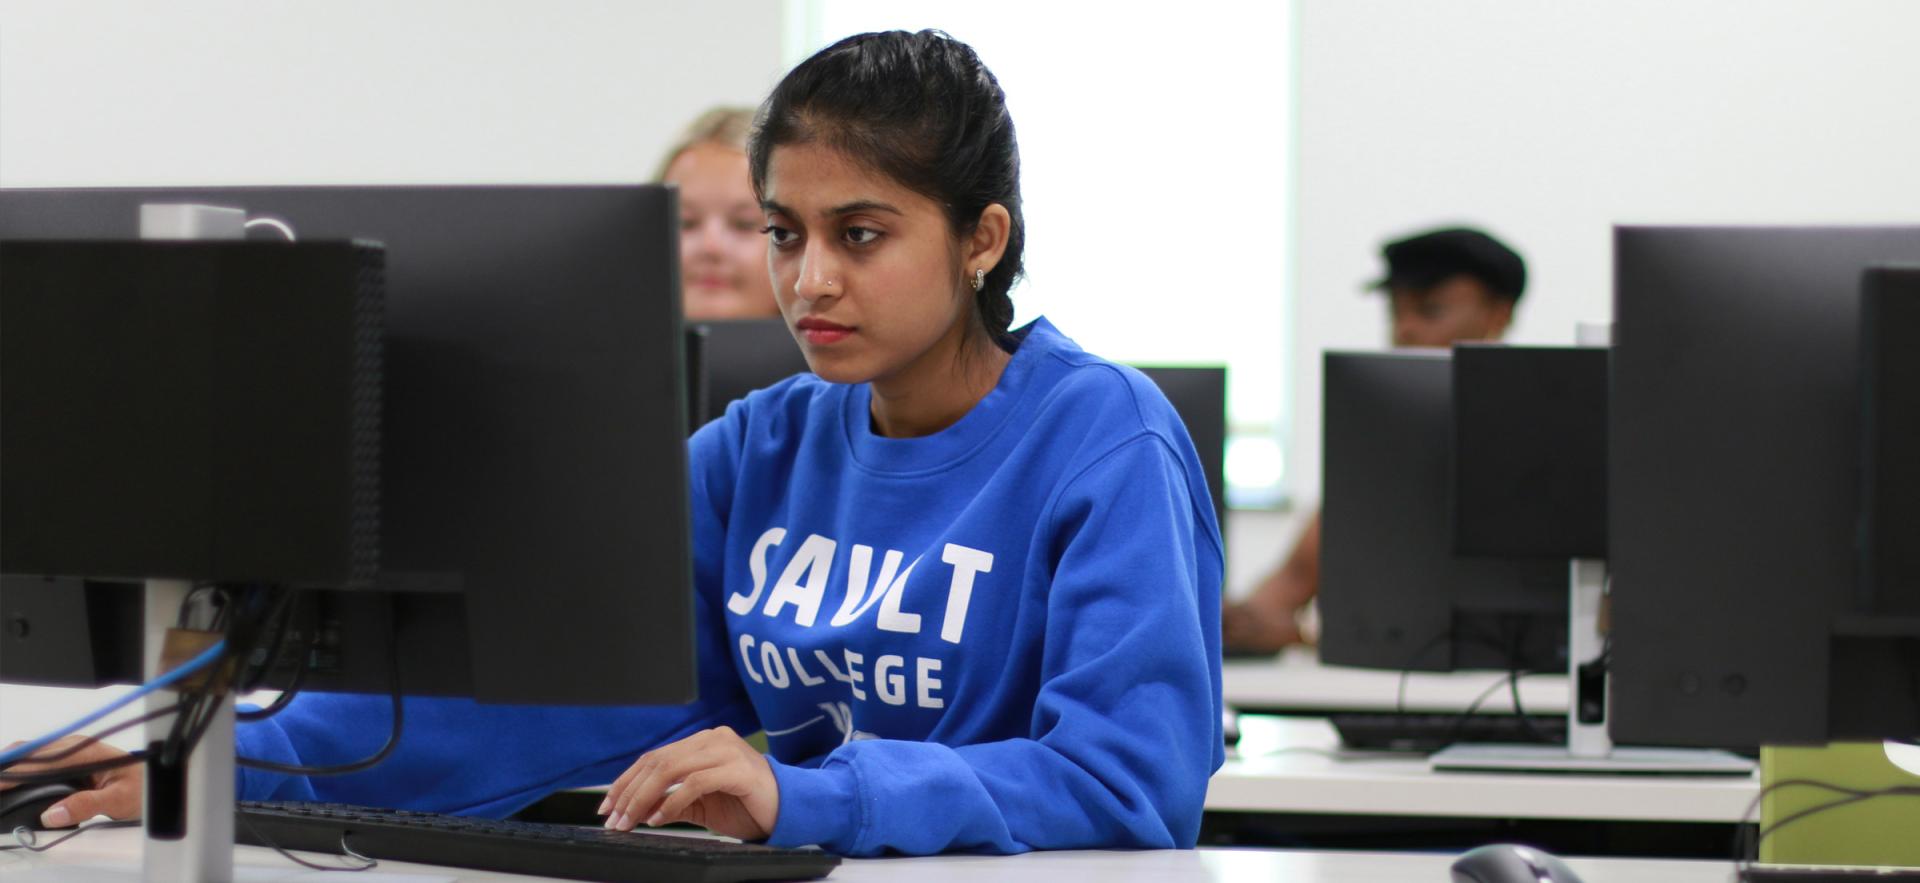 Student sitting at computer in class wearing blue Sault College sweater